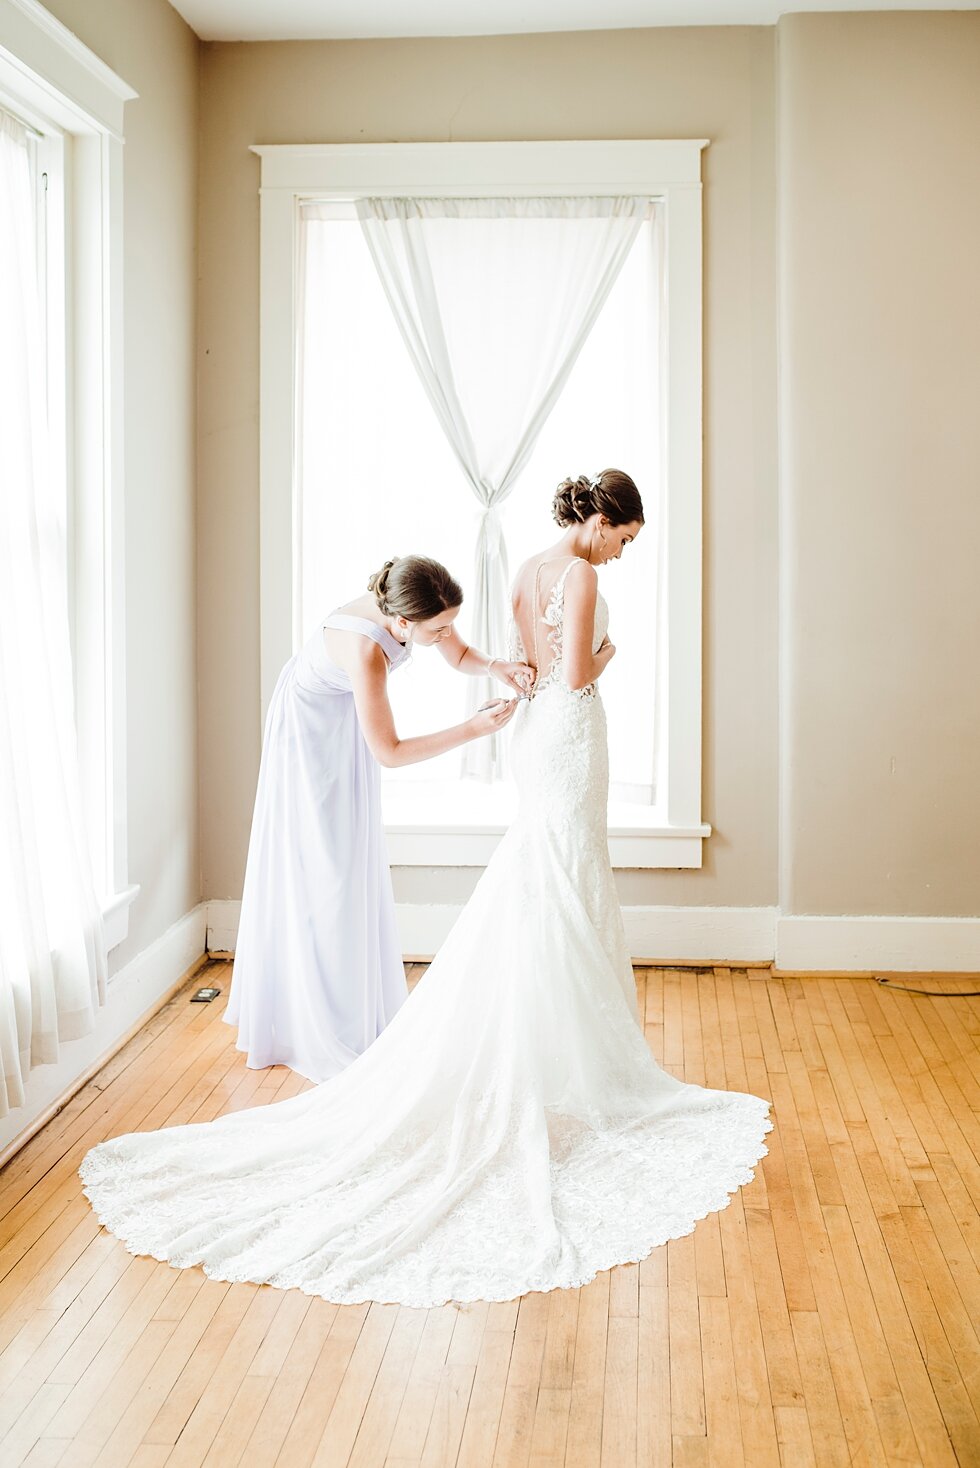  Bride having her dress zipped up by a member of her bridal party in the preparation rooms at The Loft on Spring. wedding ceremony details stunning photography married midwest louisville kentucky #weddingphoto #love #justmarried #midwestphotographer 